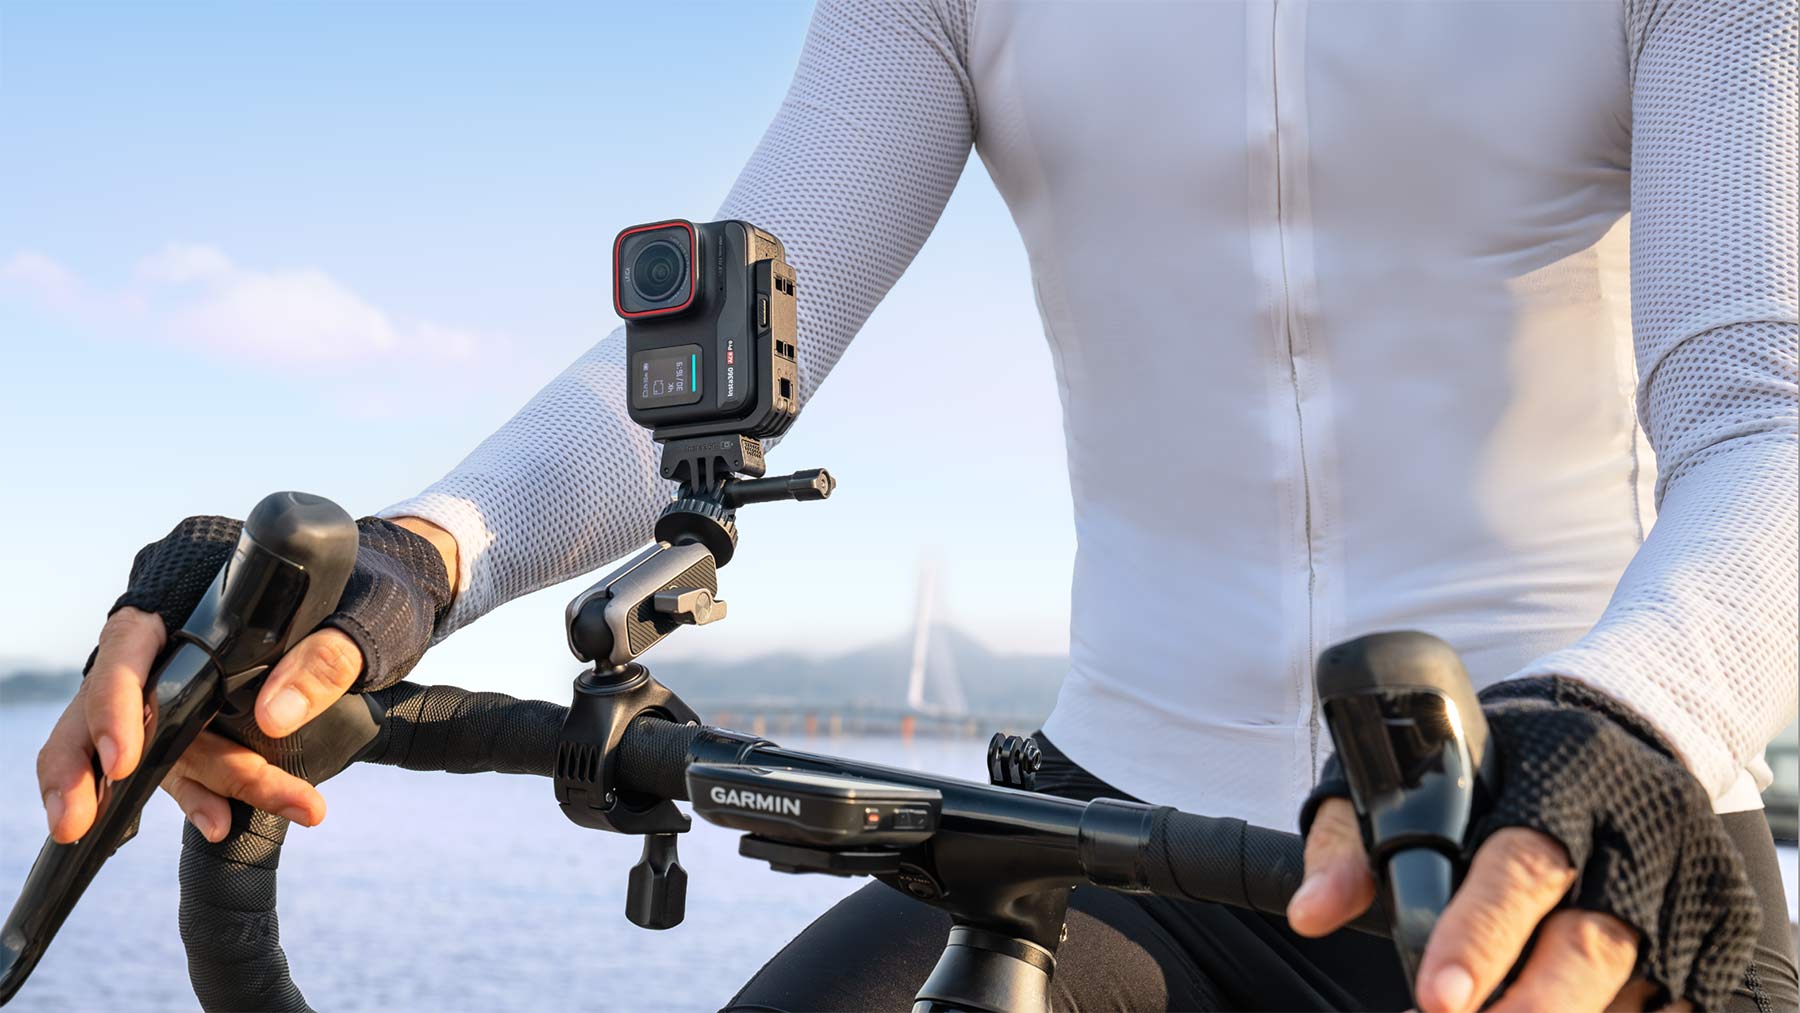 insta360 ace pro action camera on a bike in vertical mode